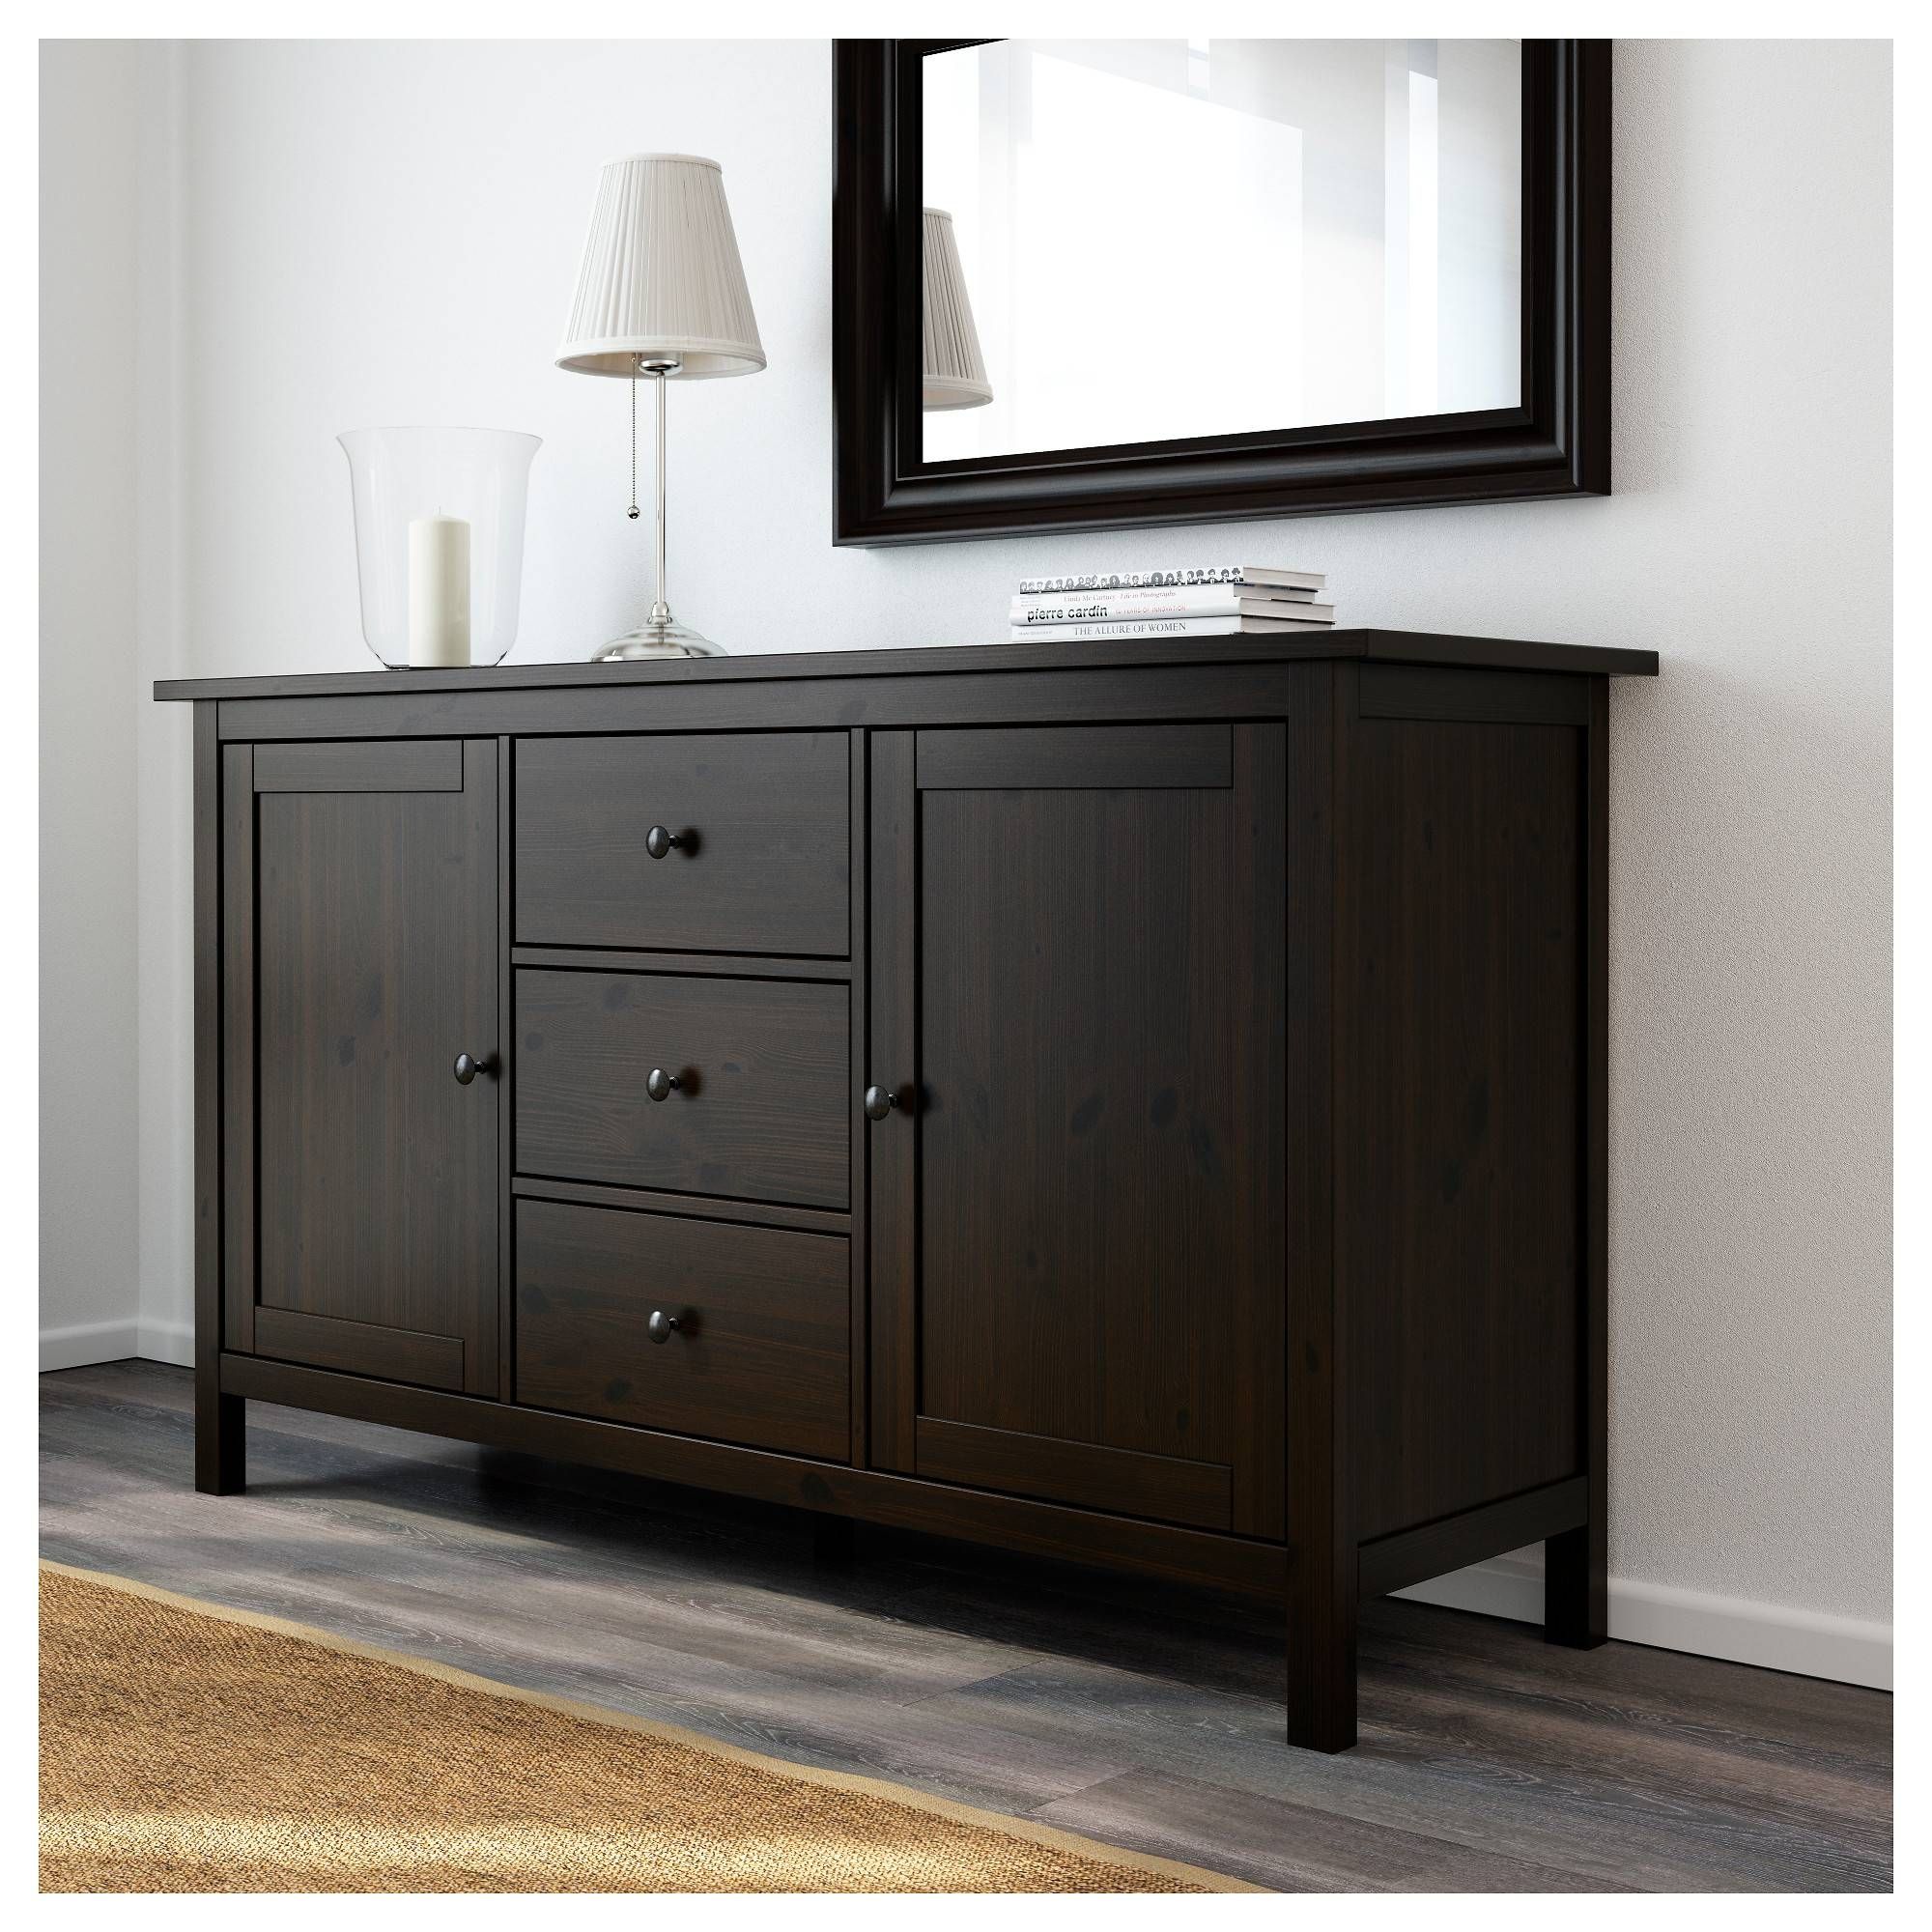 Hemnes Sideboard – White Stain – Ikea Intended For 2018 Sideboard Cabinets (View 11 of 15)